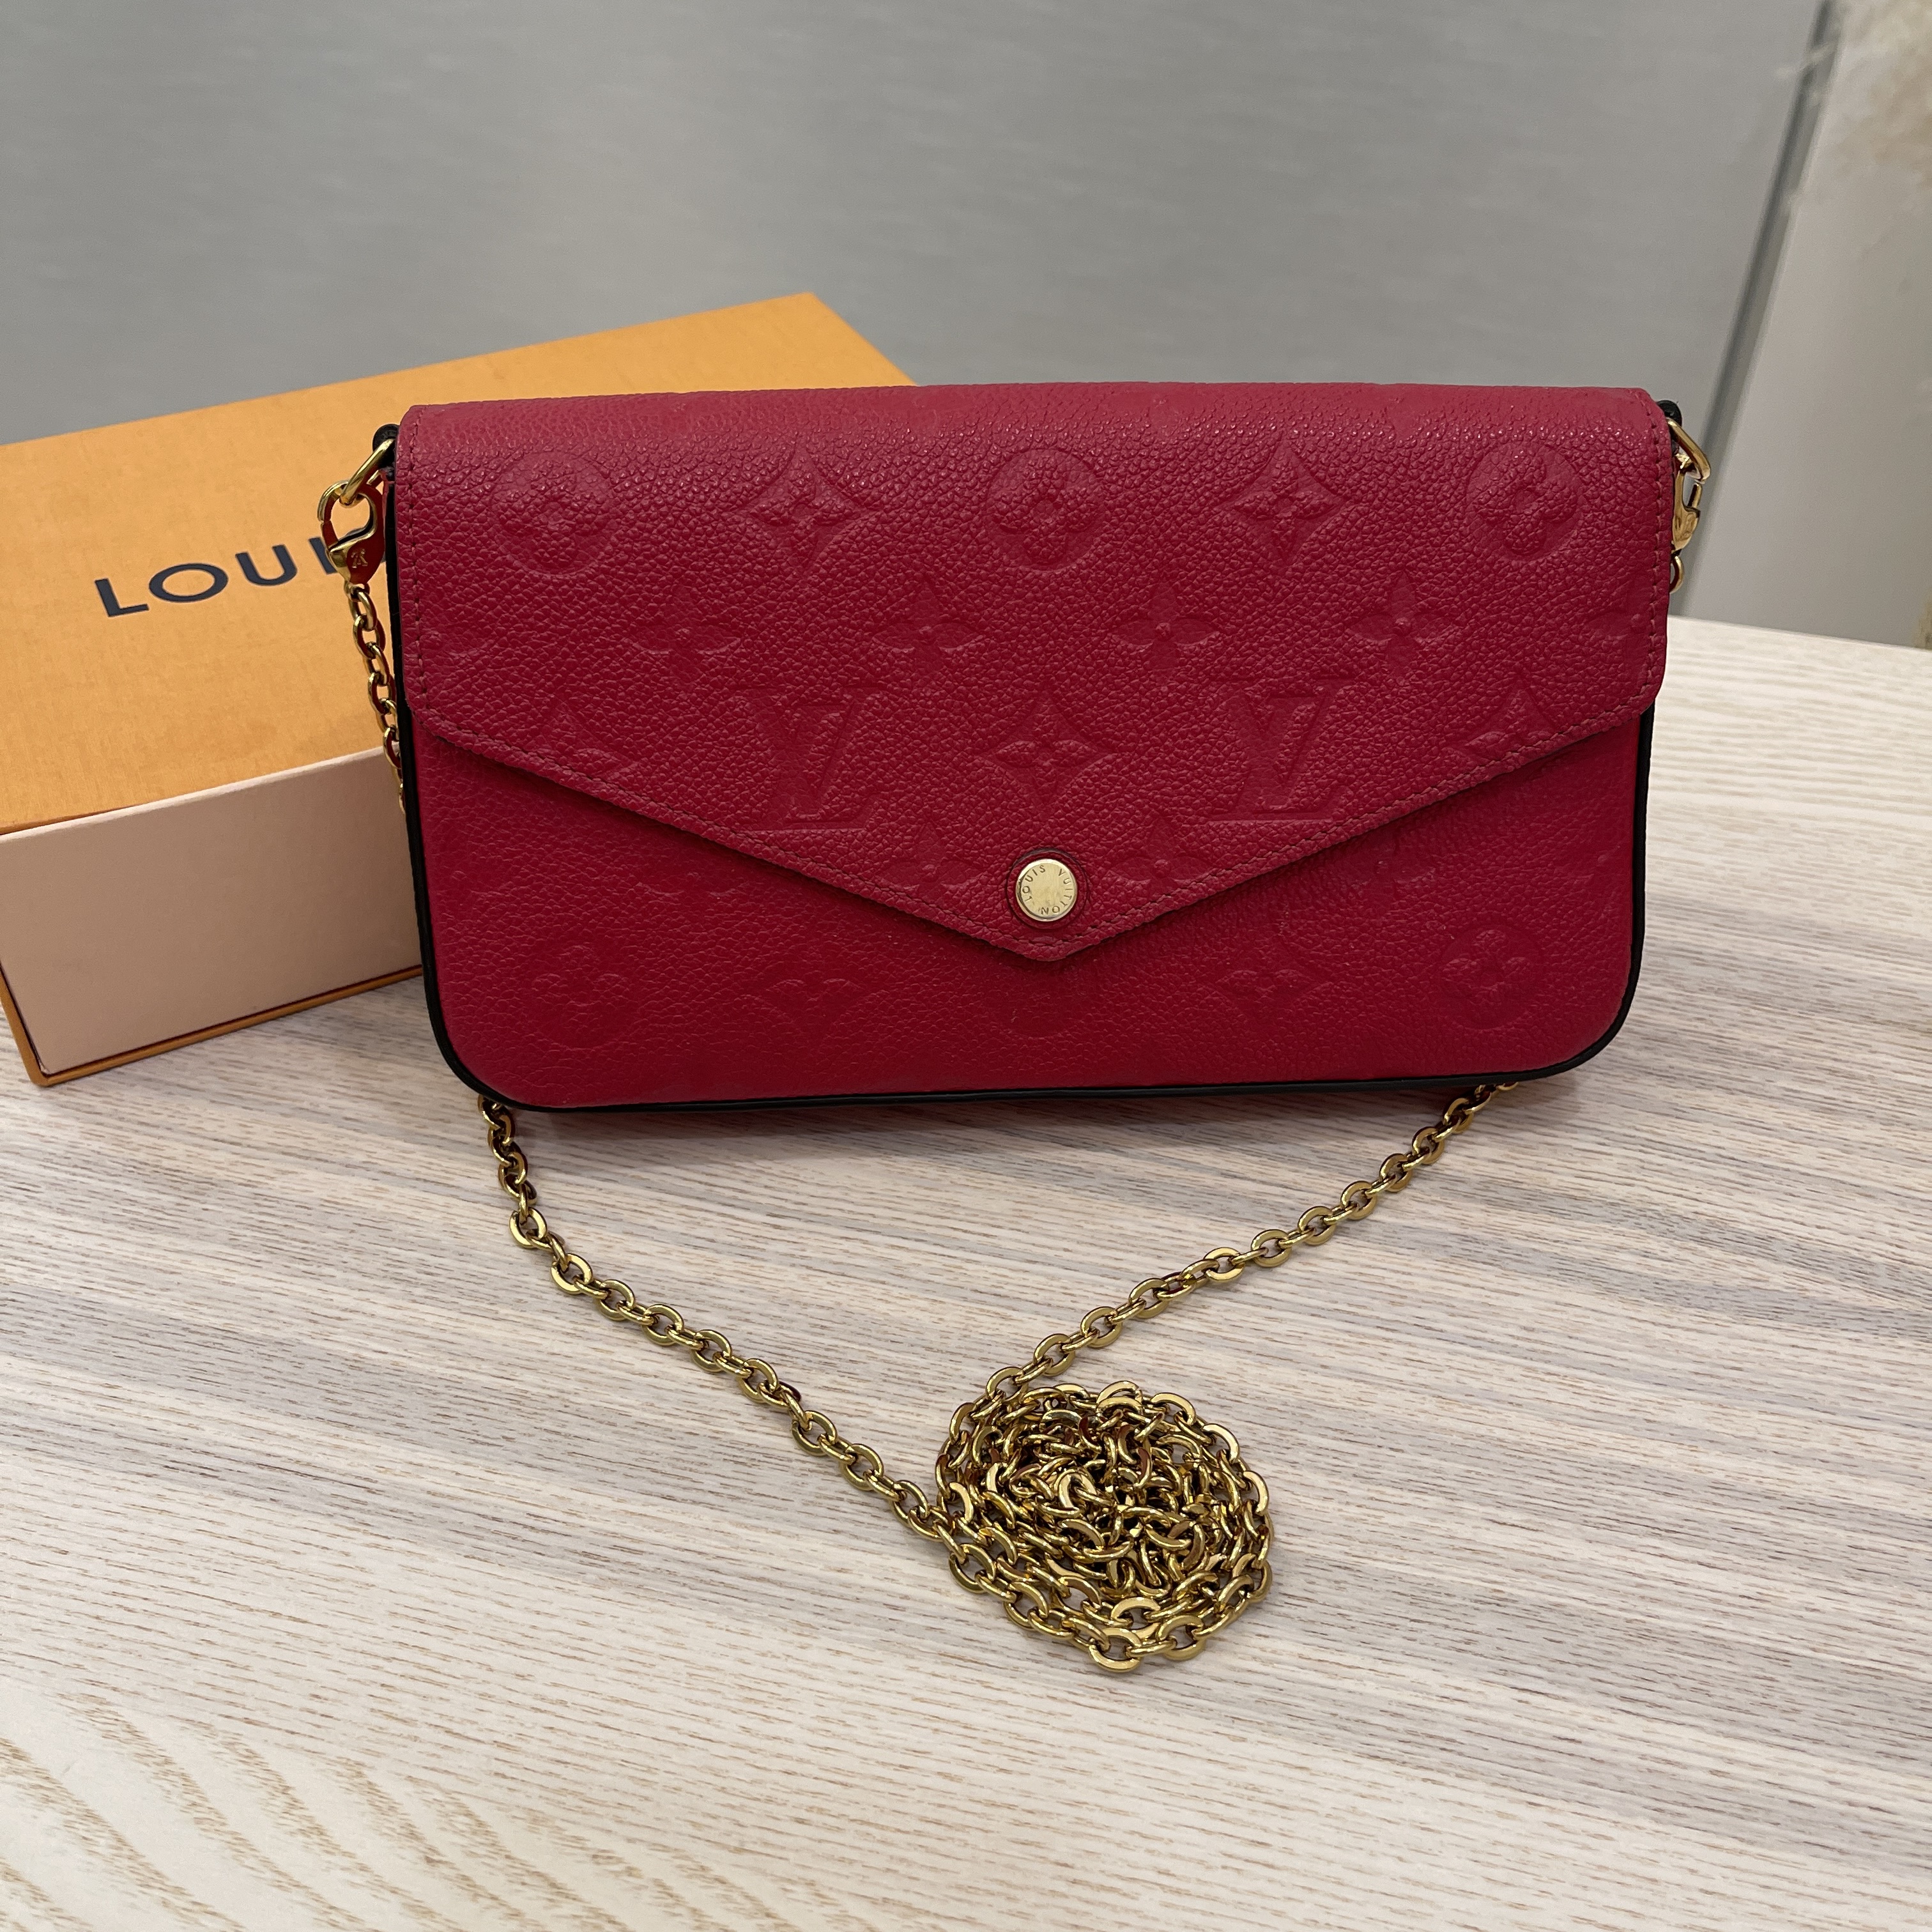 Louis Vuitton Credit Card Cerise Red Insert from Felicie Pochette